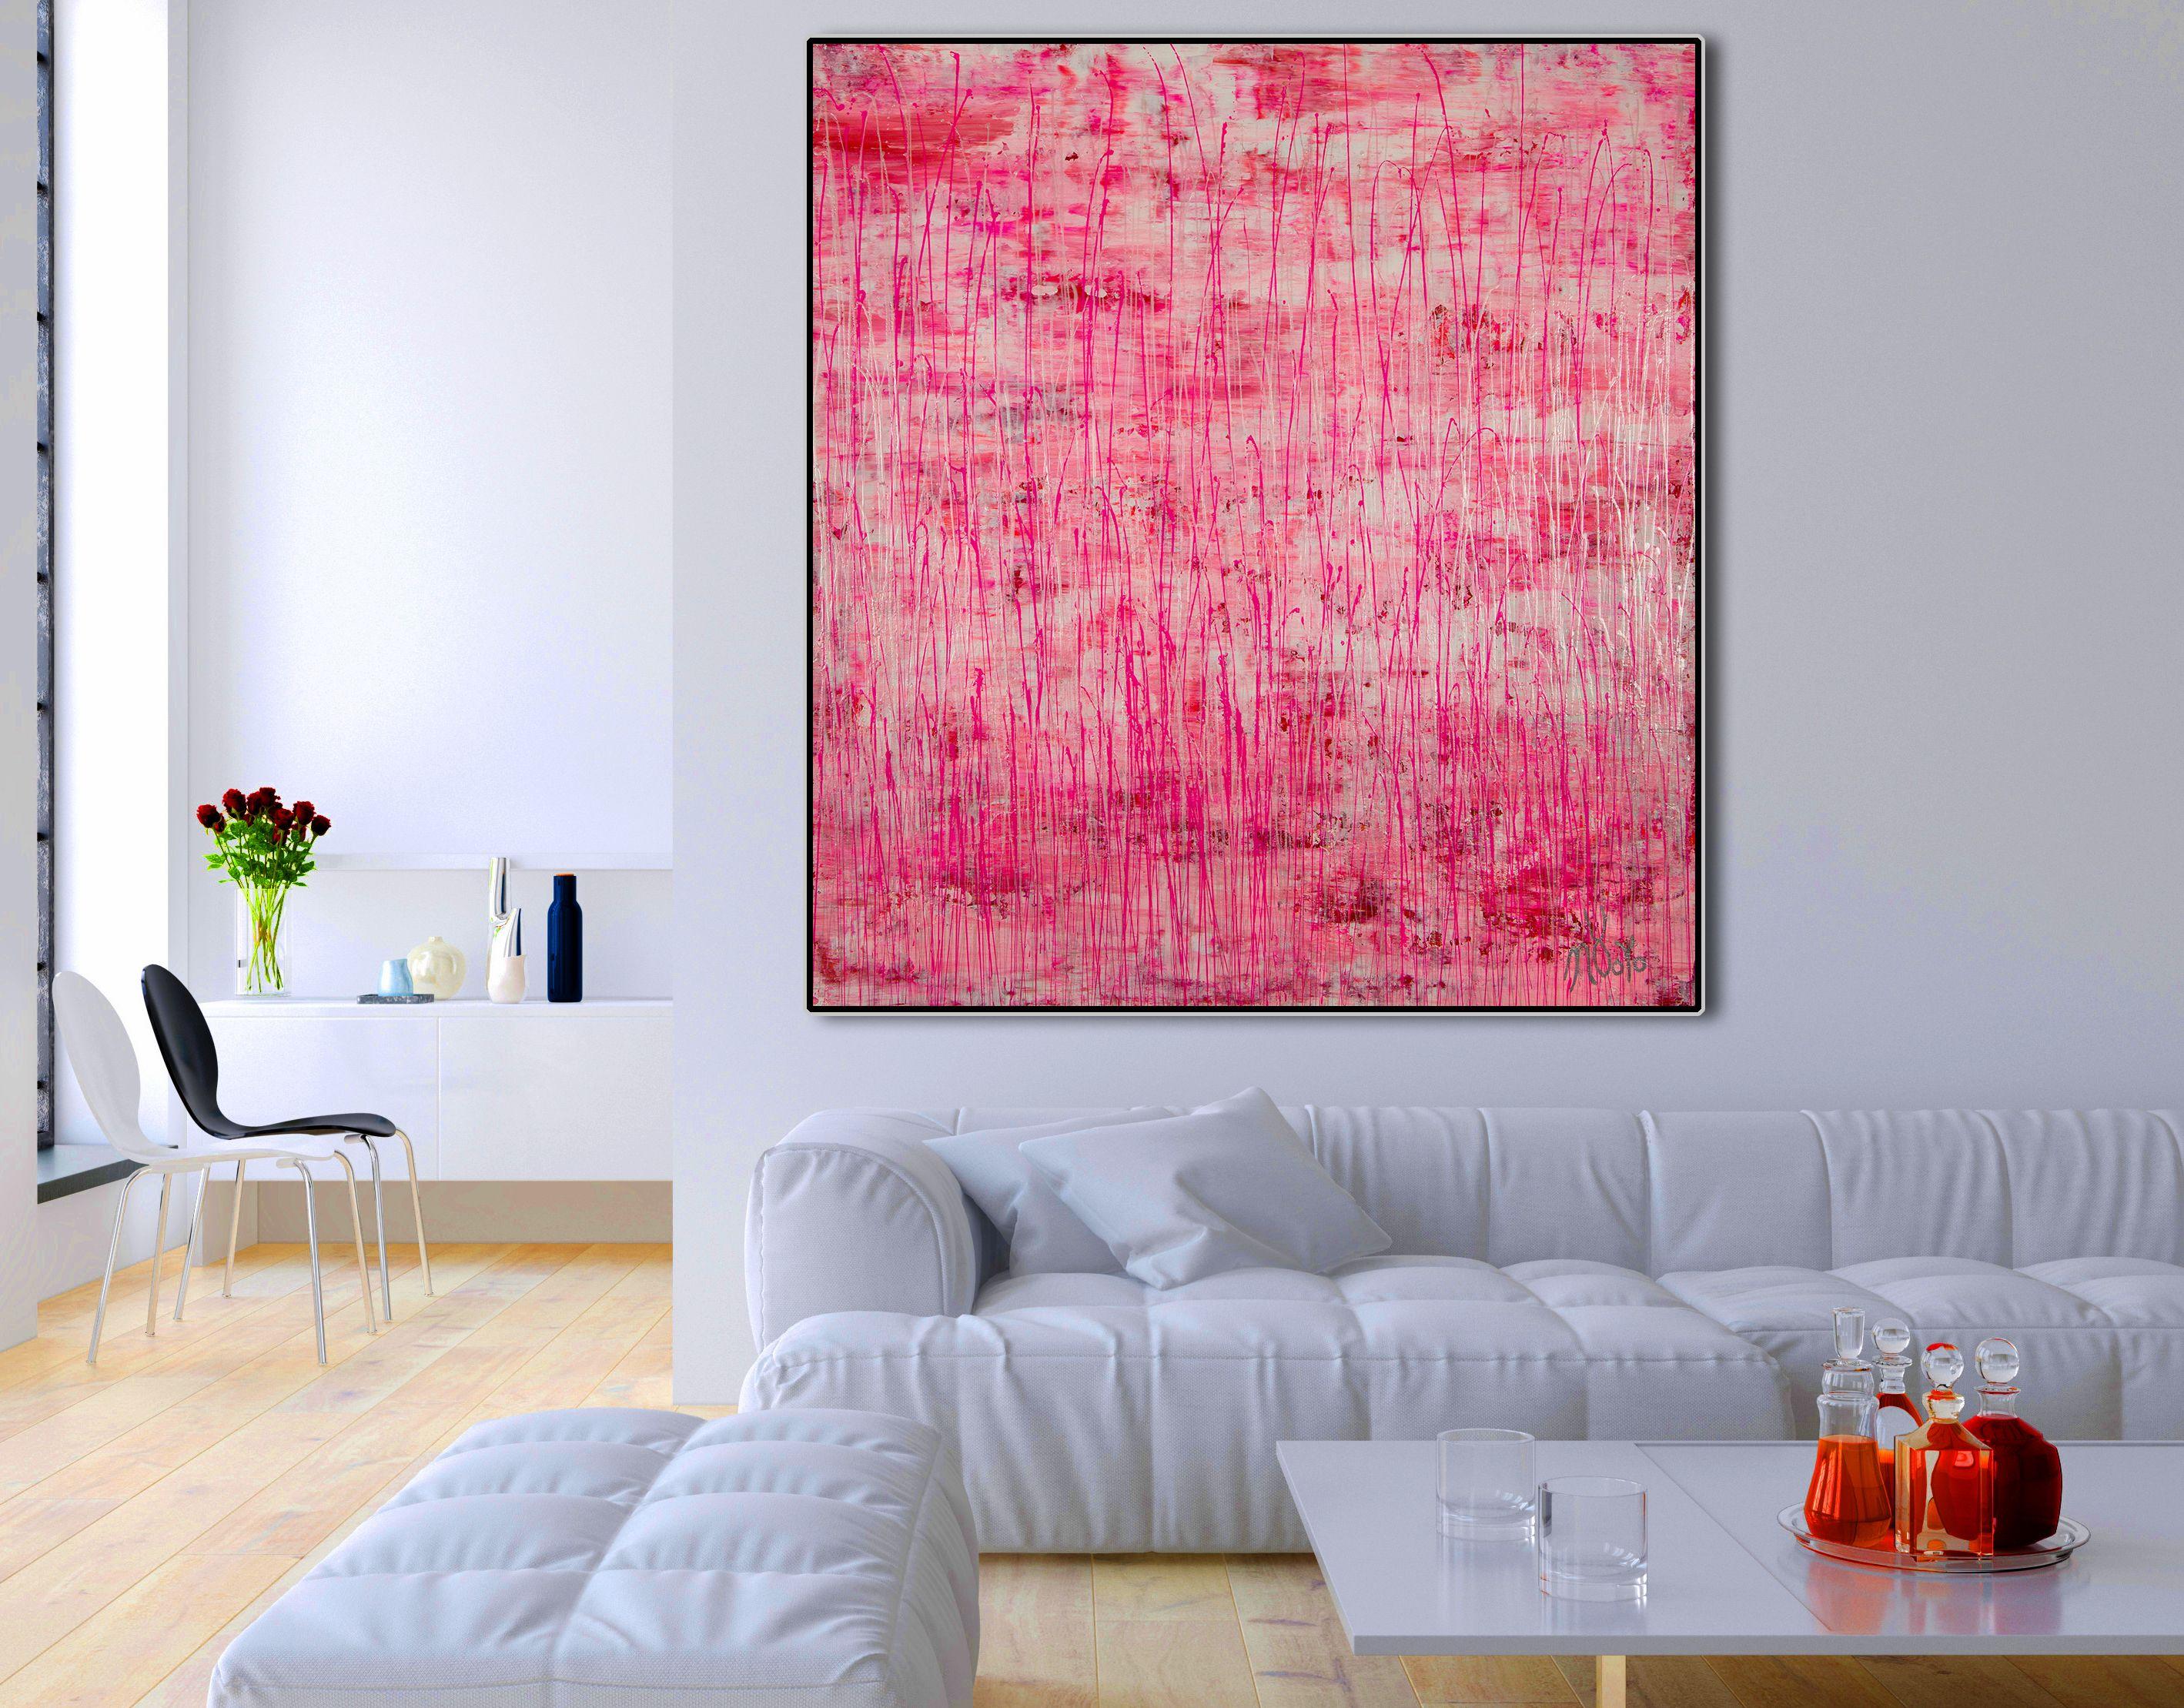 Painting: Acrylic on Canvas.    Abstract iridescent painting  acrylic on canvas    This artwork was created layering and blending layers of pearl white, iridescent silver, light pink, pink and iridescent mica particles with silver paint drizzles.